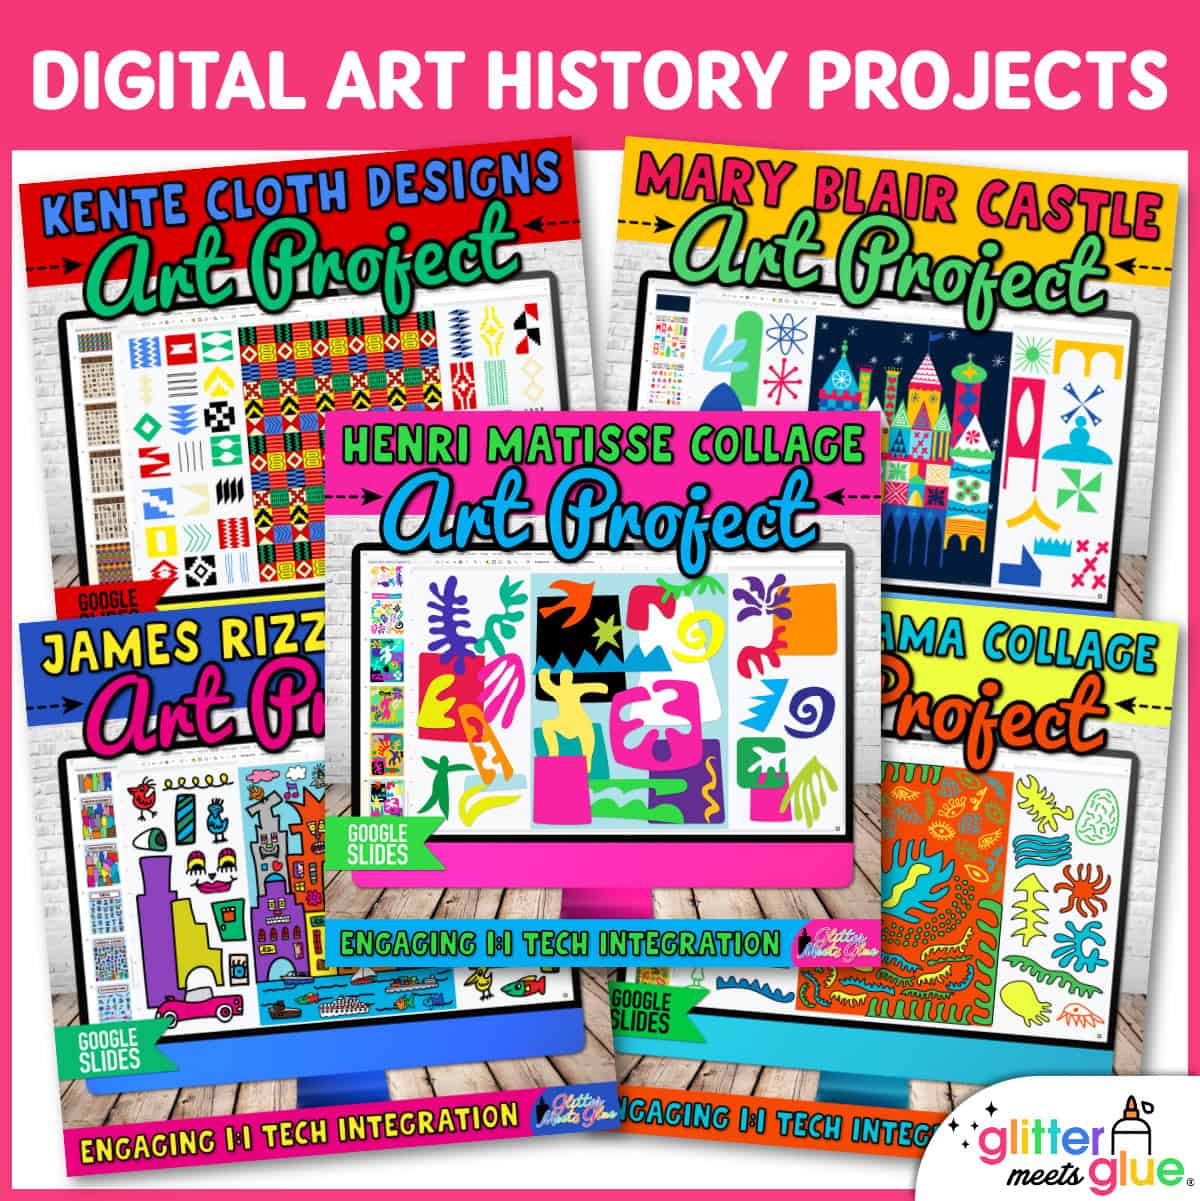 digital art history project bundle for elementary and middle school